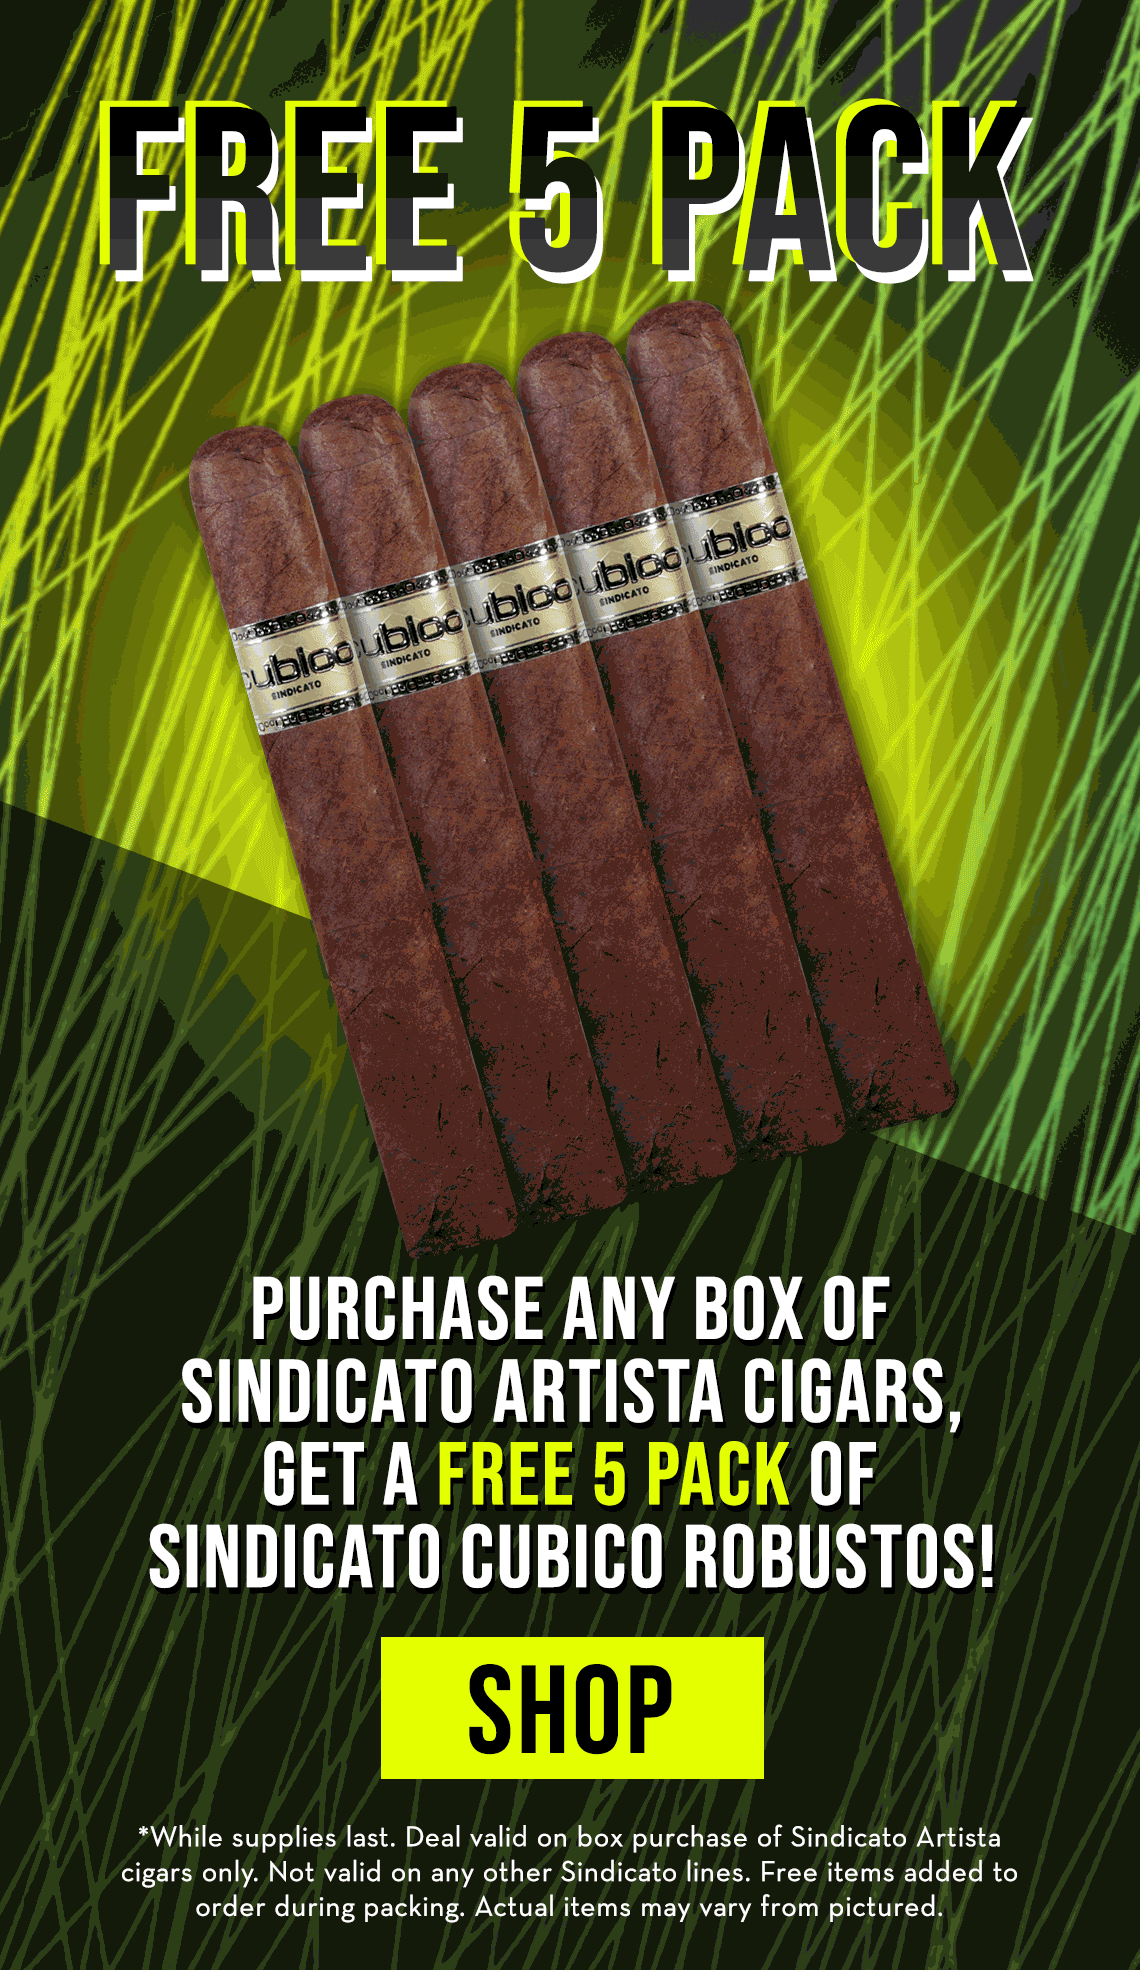 Free Cubico Robusto 5 Pack Offer